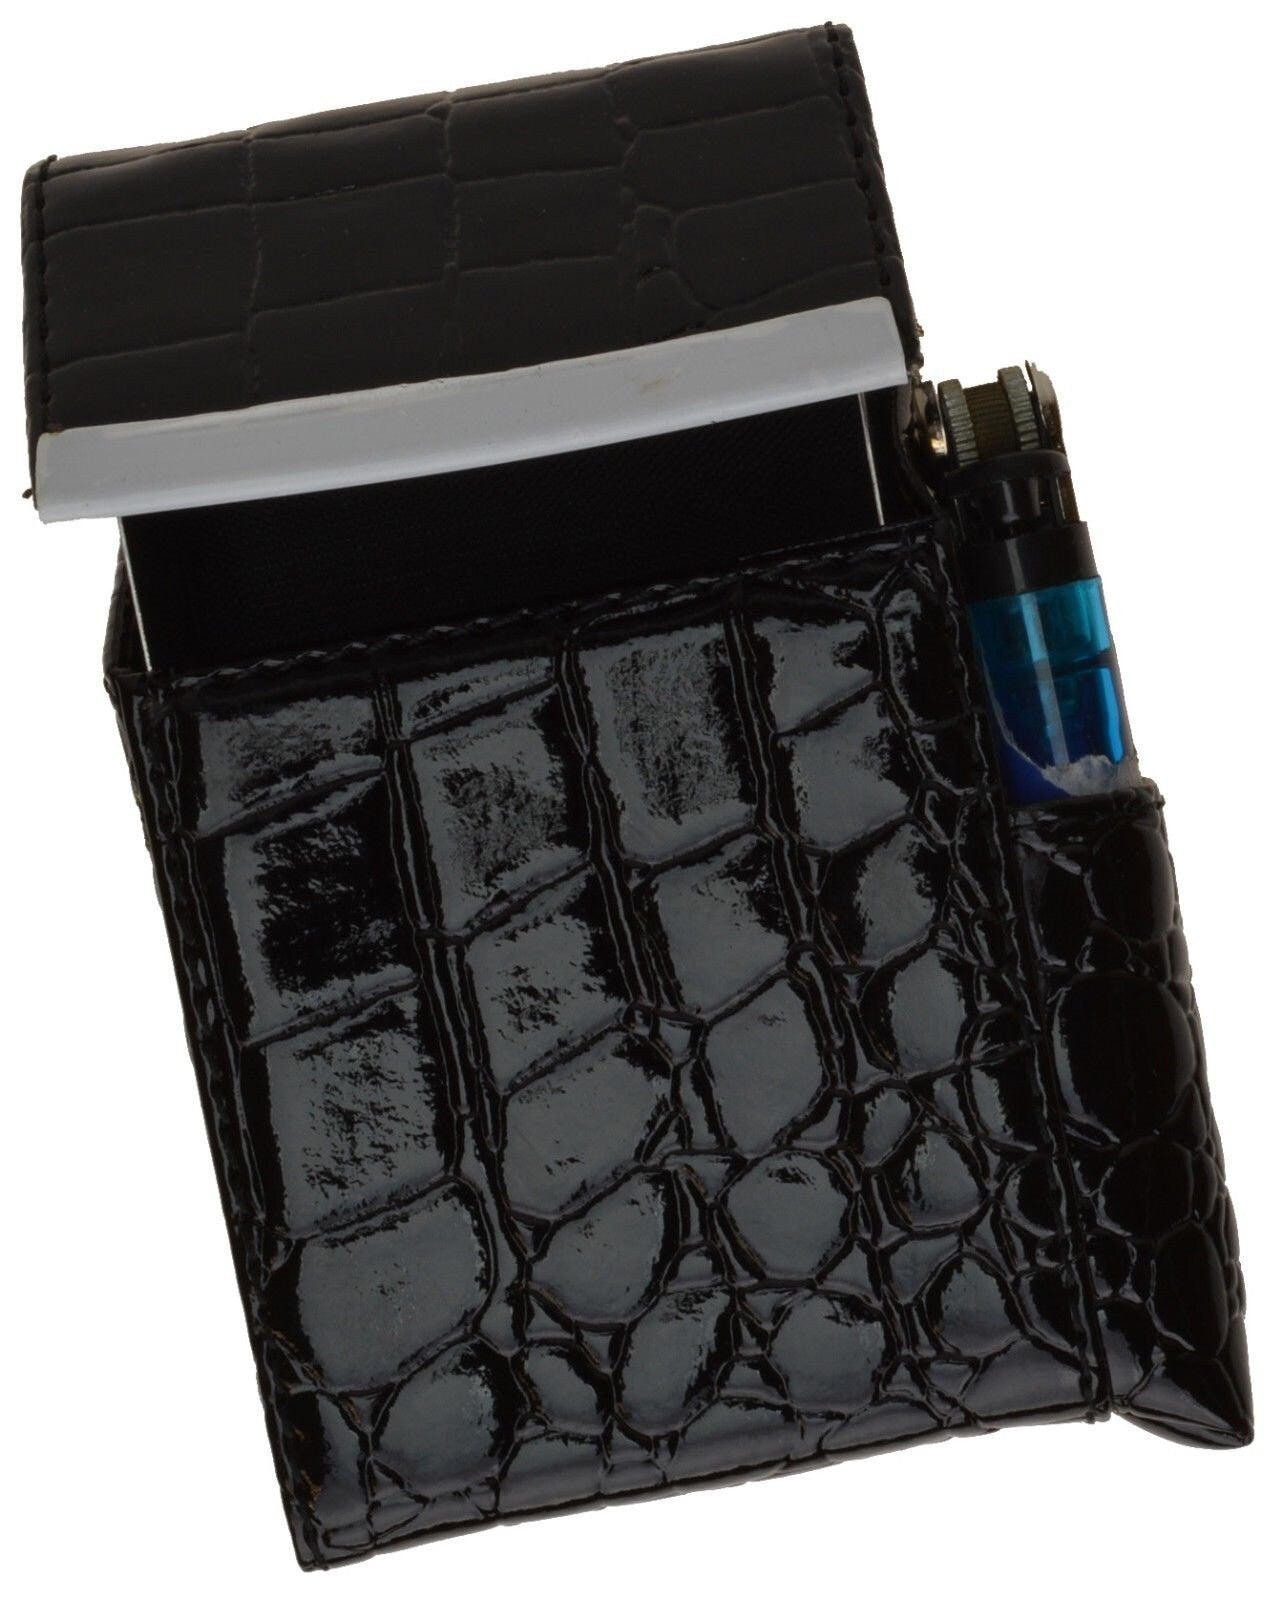 Croc Print Genuine Leather Cigarette Pack Holder Flip-Top Pouch Smoke Carrying Hard Case Croco Cowboy Style